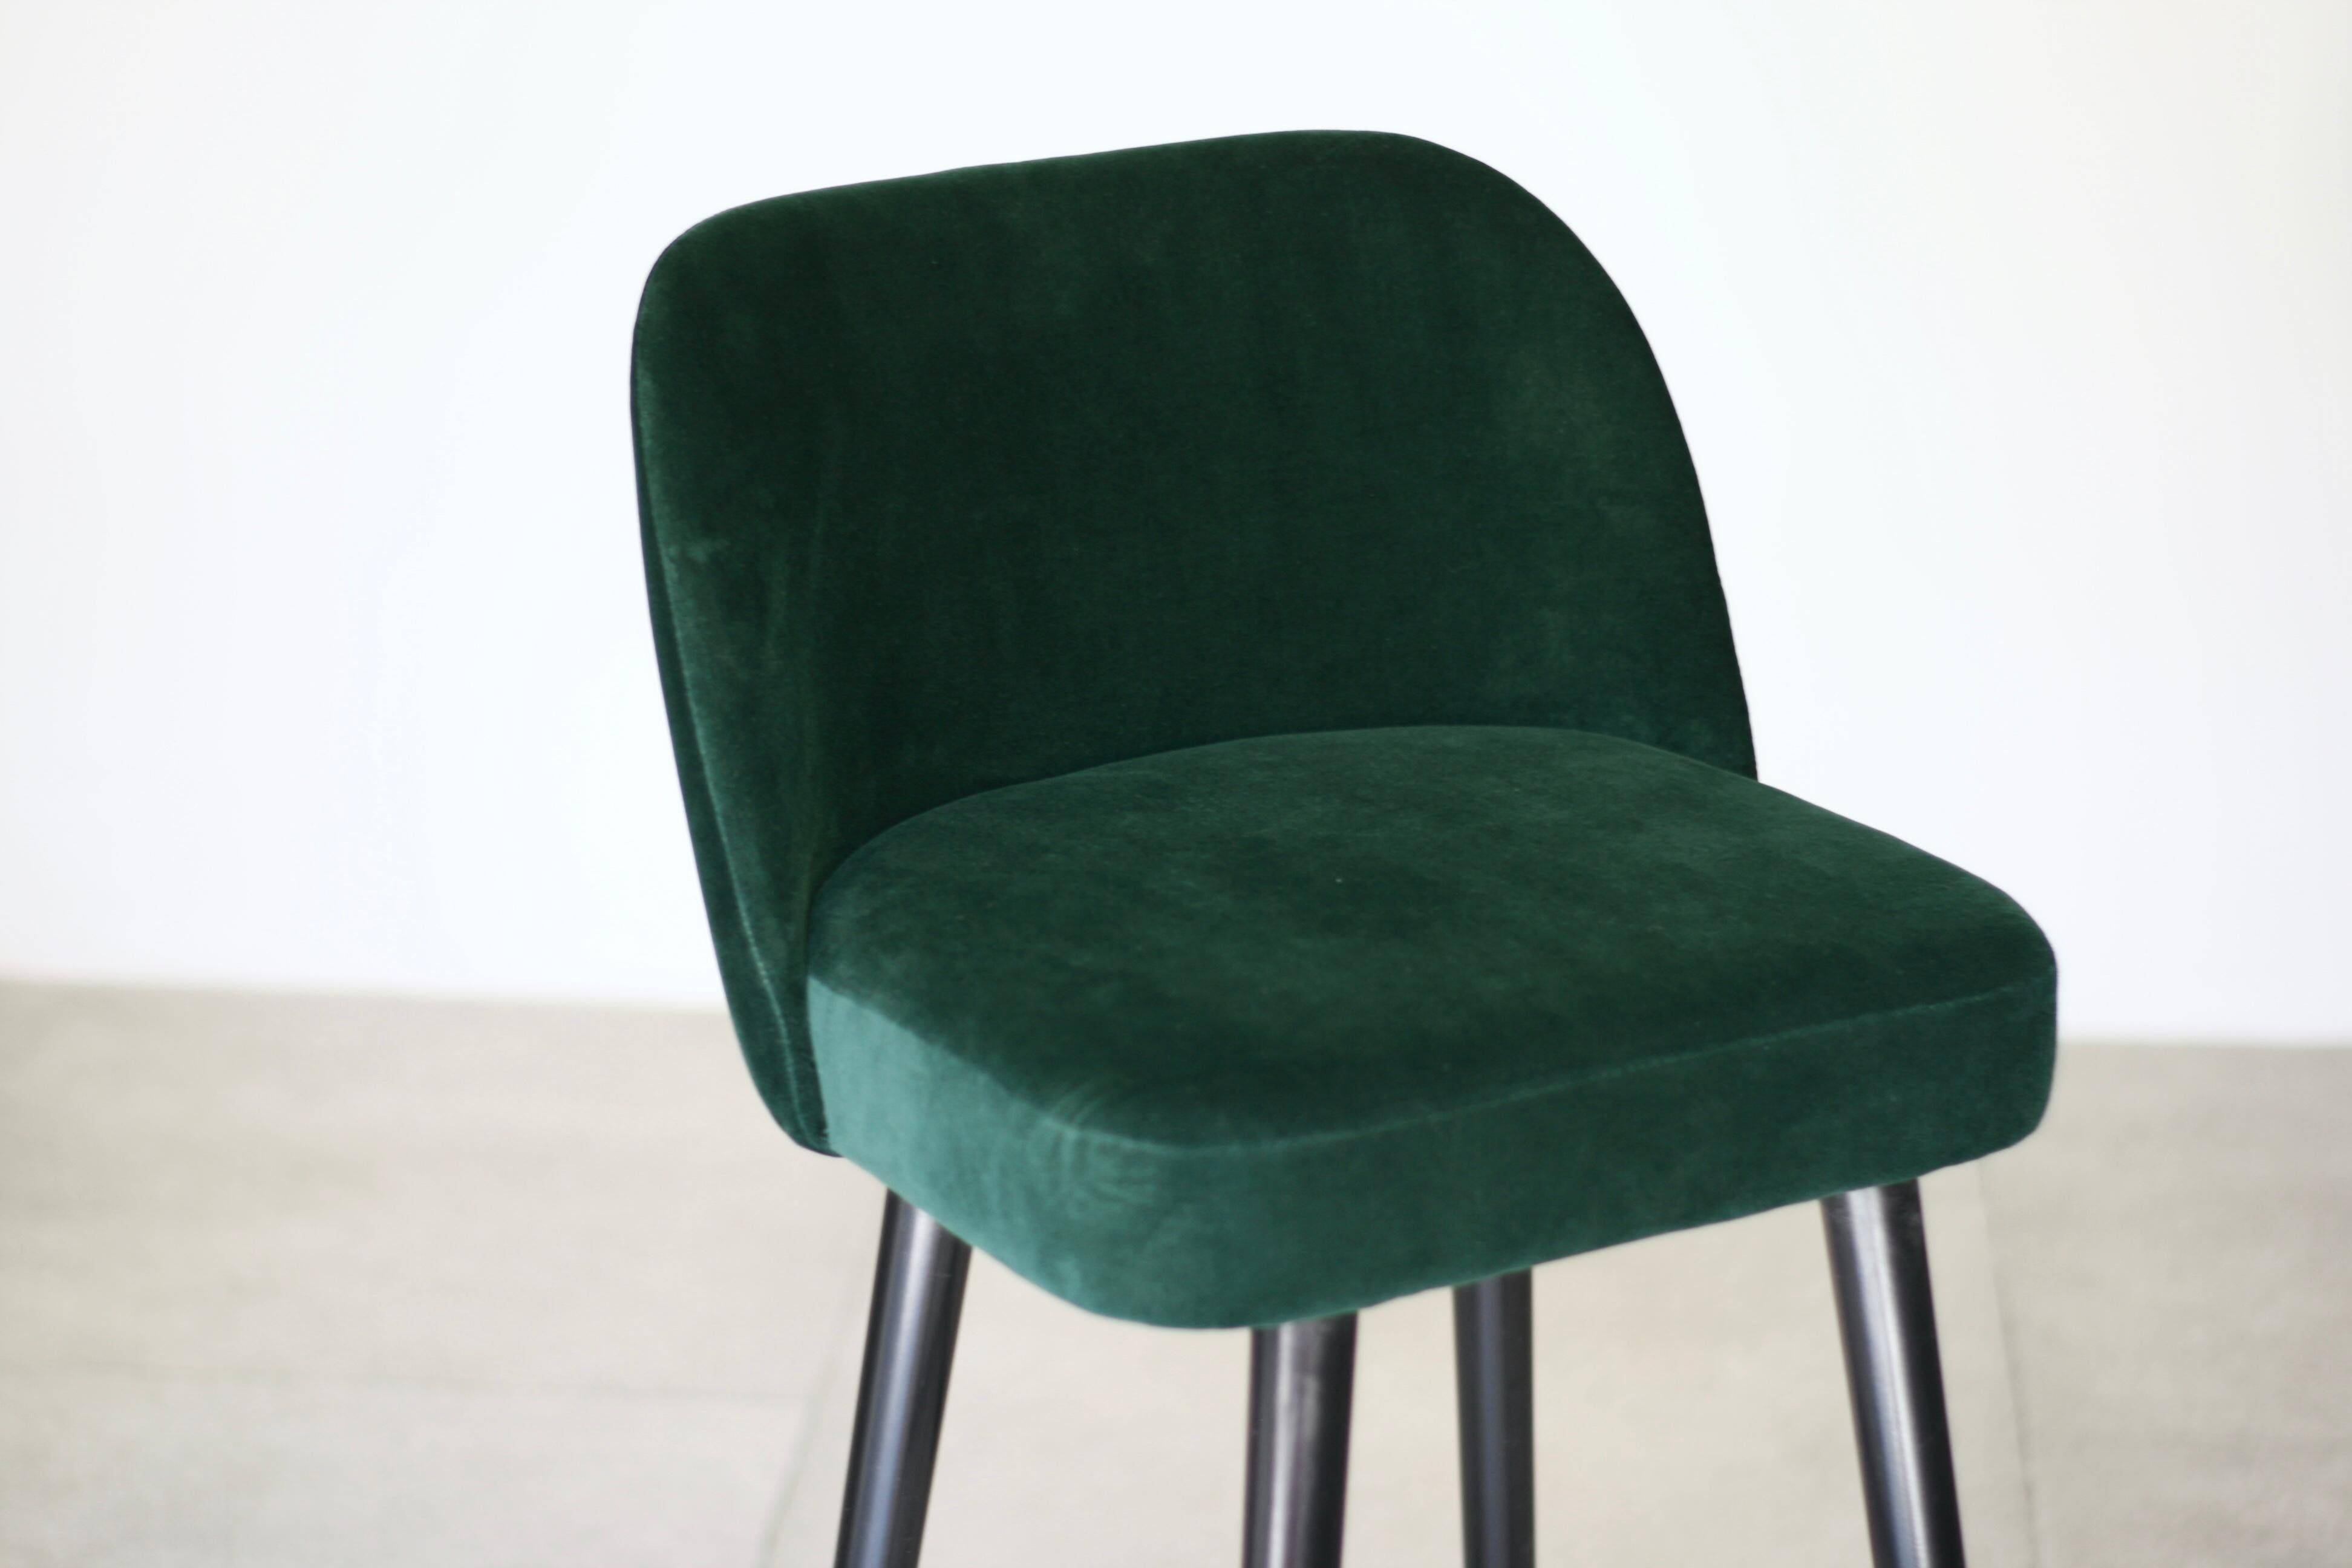 green and black stool